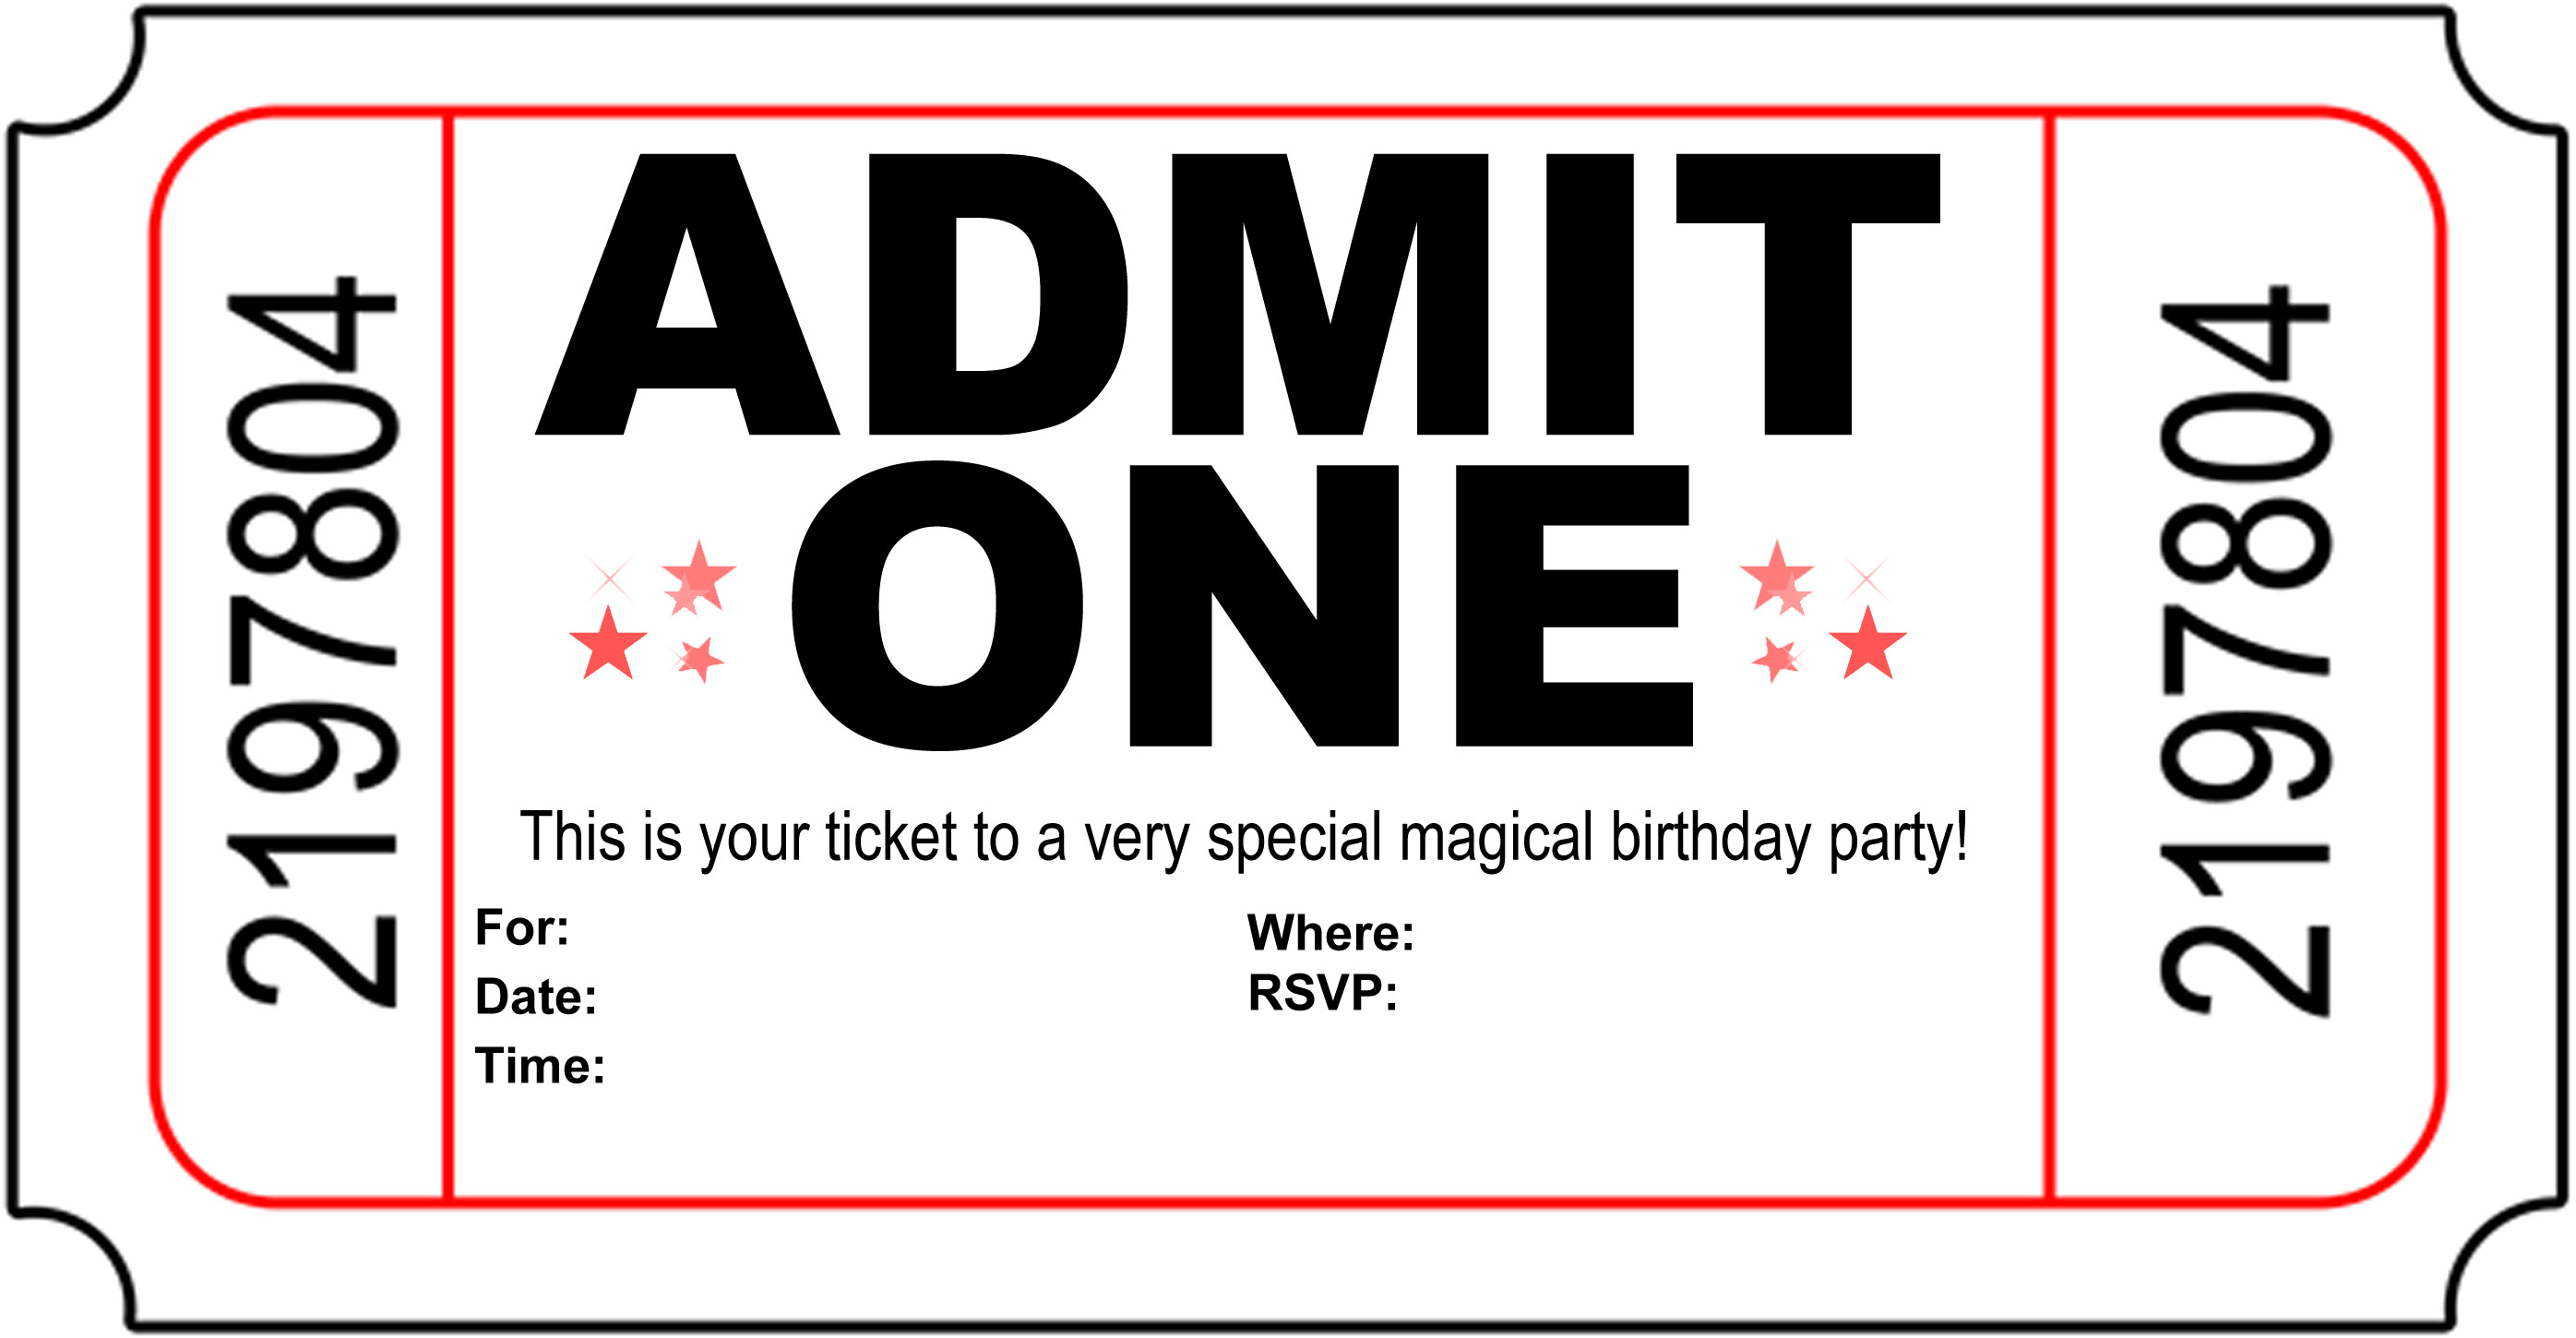 Free Carnival Ticket Invitation Template Download Free Clip Art inside size 2792 X 1450